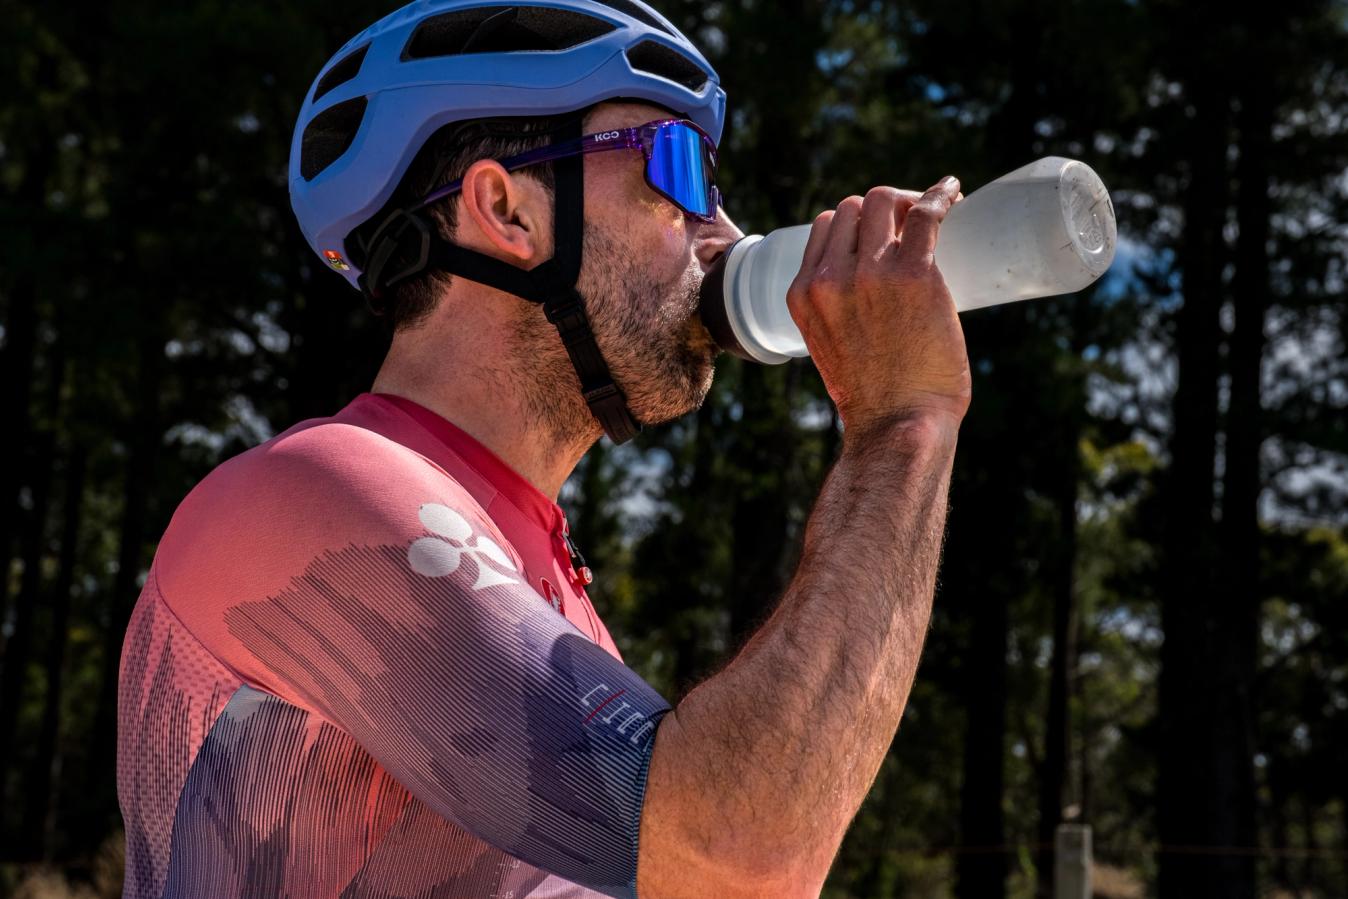 Make sure you've taken enough water for your gravel ride